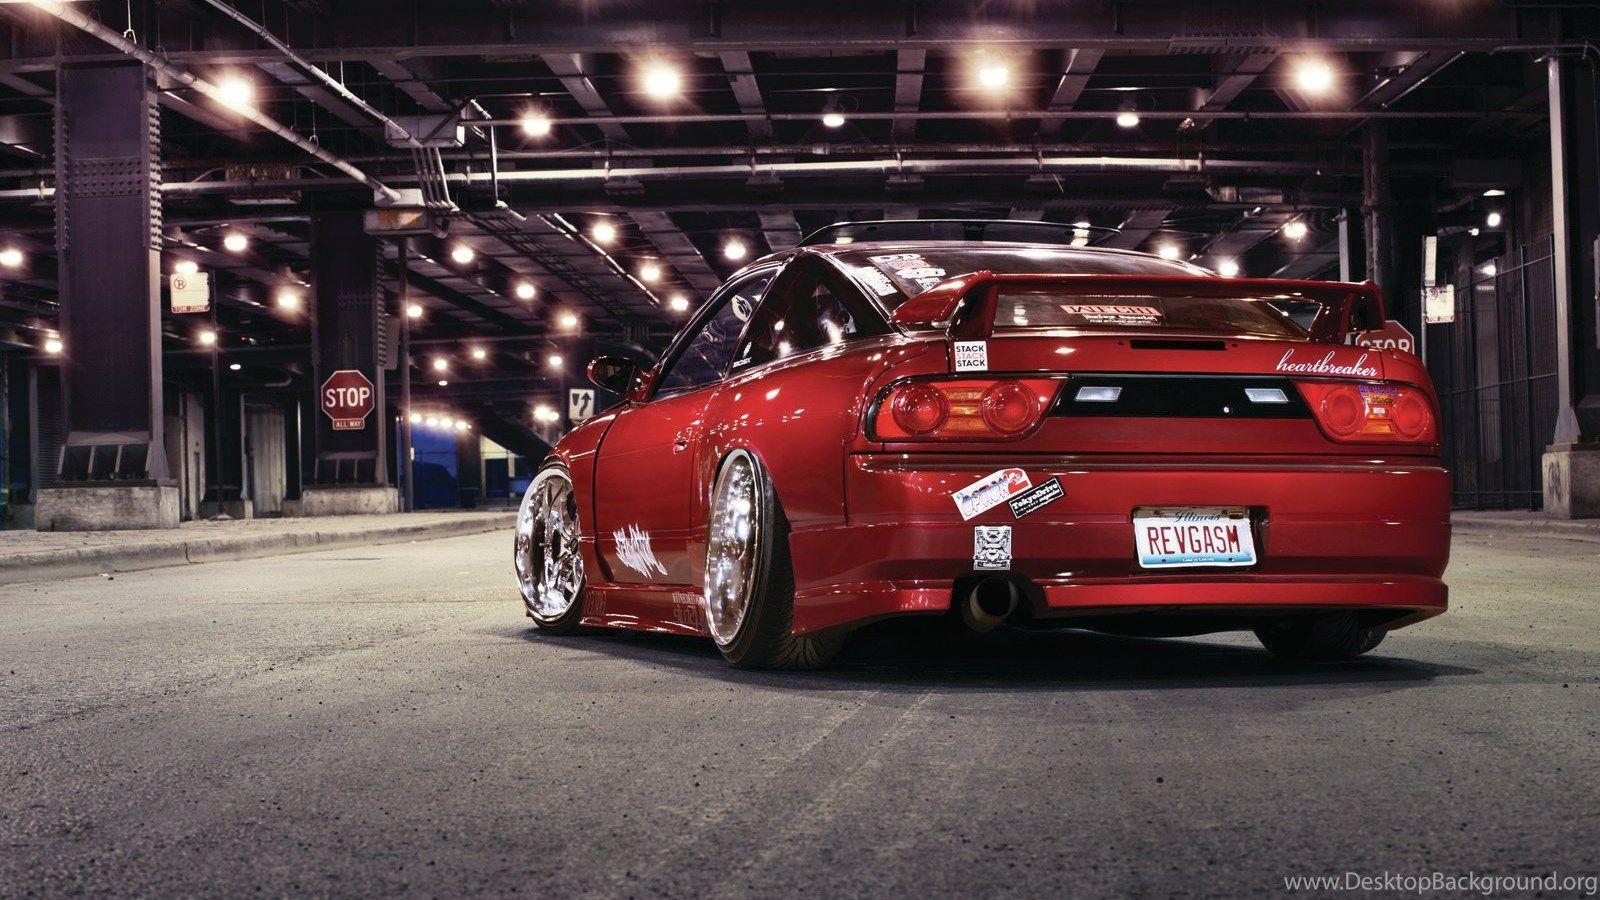 Wallpaper ID 101323  EDC Graphics Nissan 240SX Nissan render JDM  Initial D anime Japanese cars rear view red cars free download